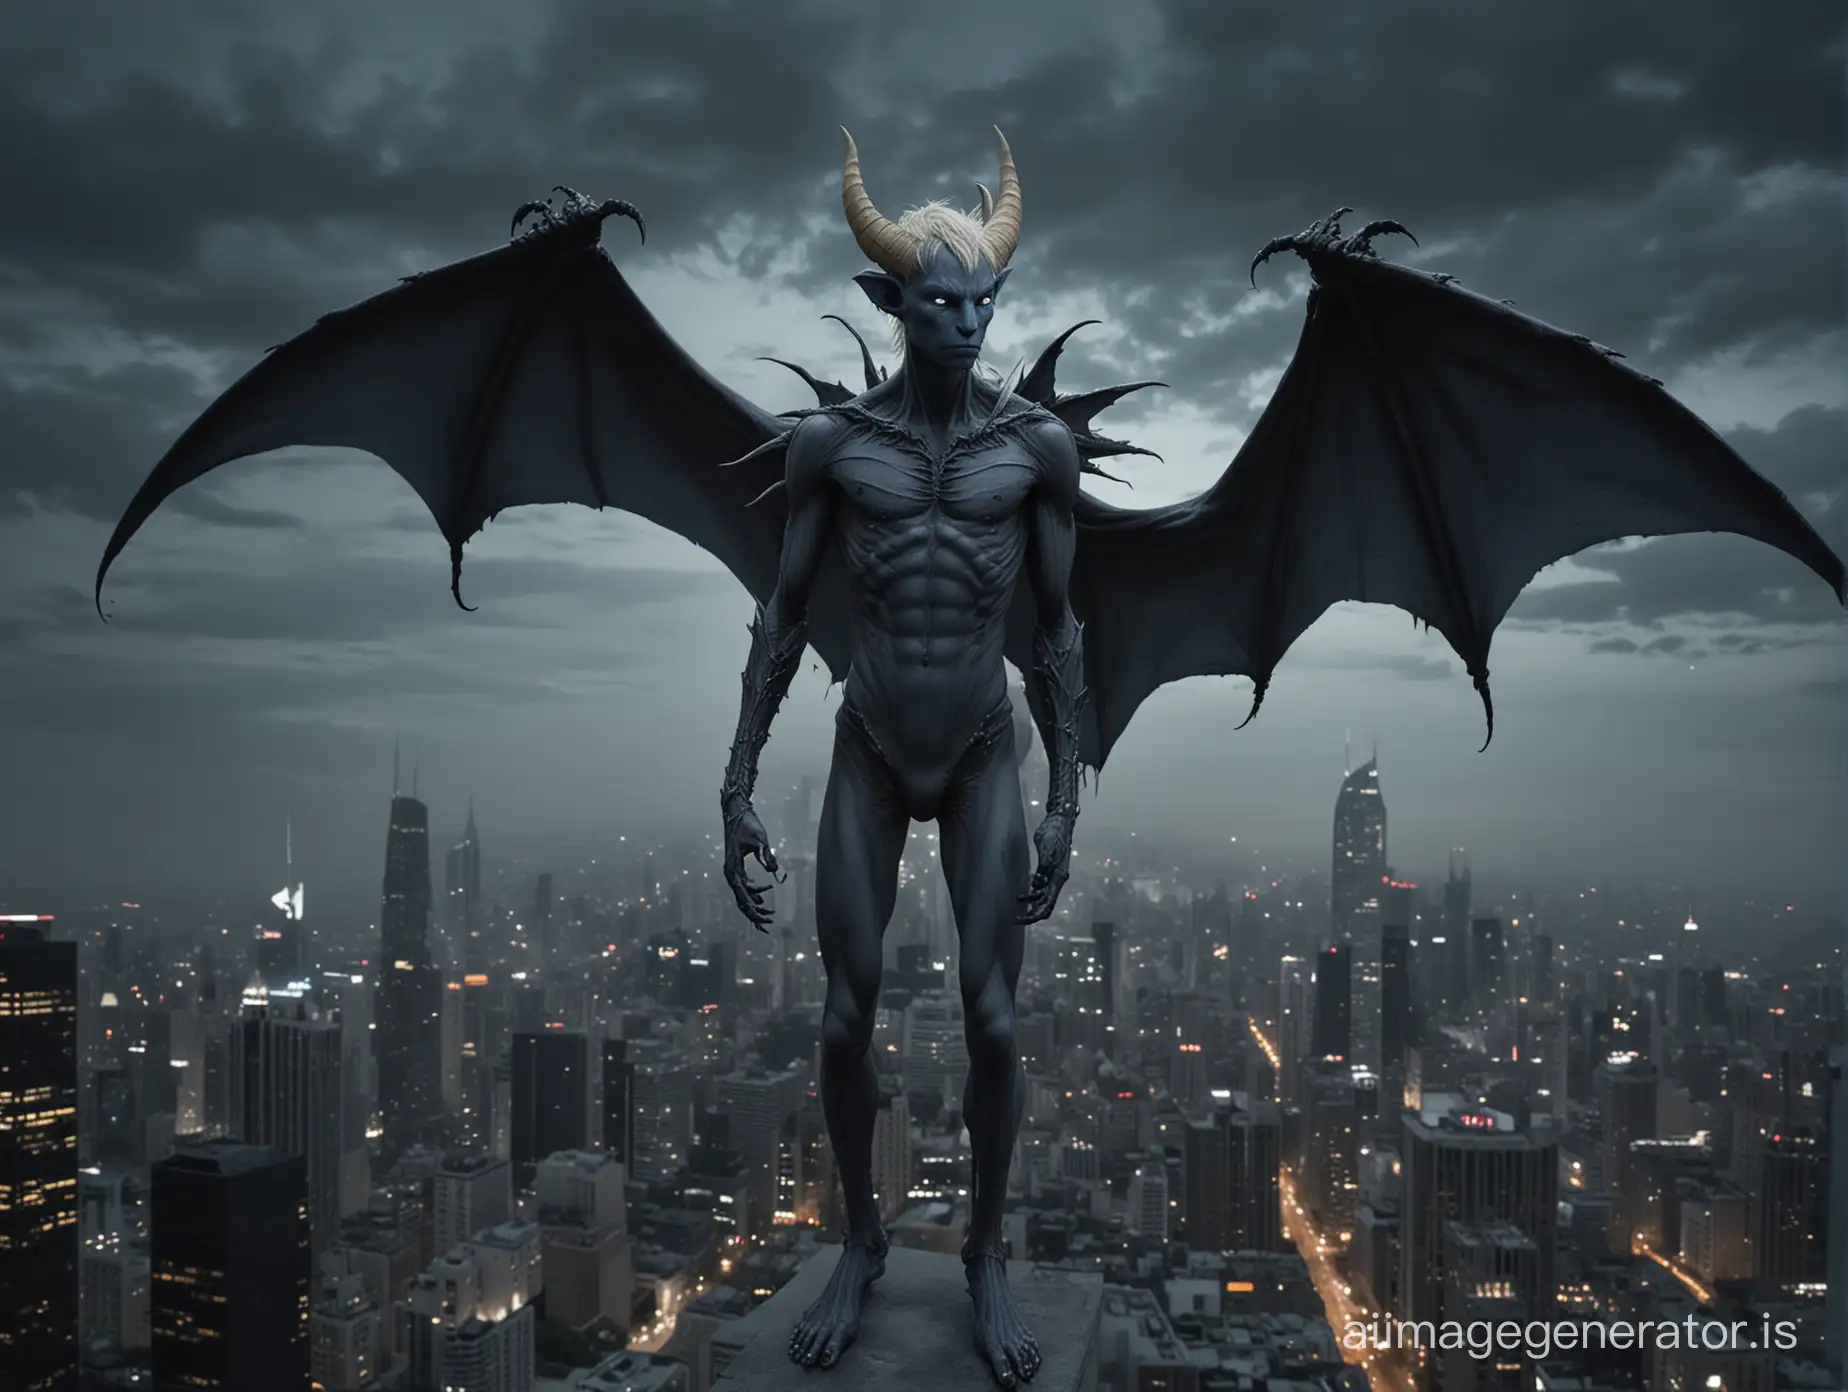 It’s Night. A gray-blue-skin demon-teenboy with humanoid proportions. He is slender. He has a large tail, growing at the end of his spine. He has natural bat-like wings. Two small horns growing from the forehead. He has pointet ears. He has blonde hair. He has claws instead of fingers and toes. He has animal-like feet. He stands on a Skyscraper in a dark cloudy Night. Show the entire teenboy in a long shot.